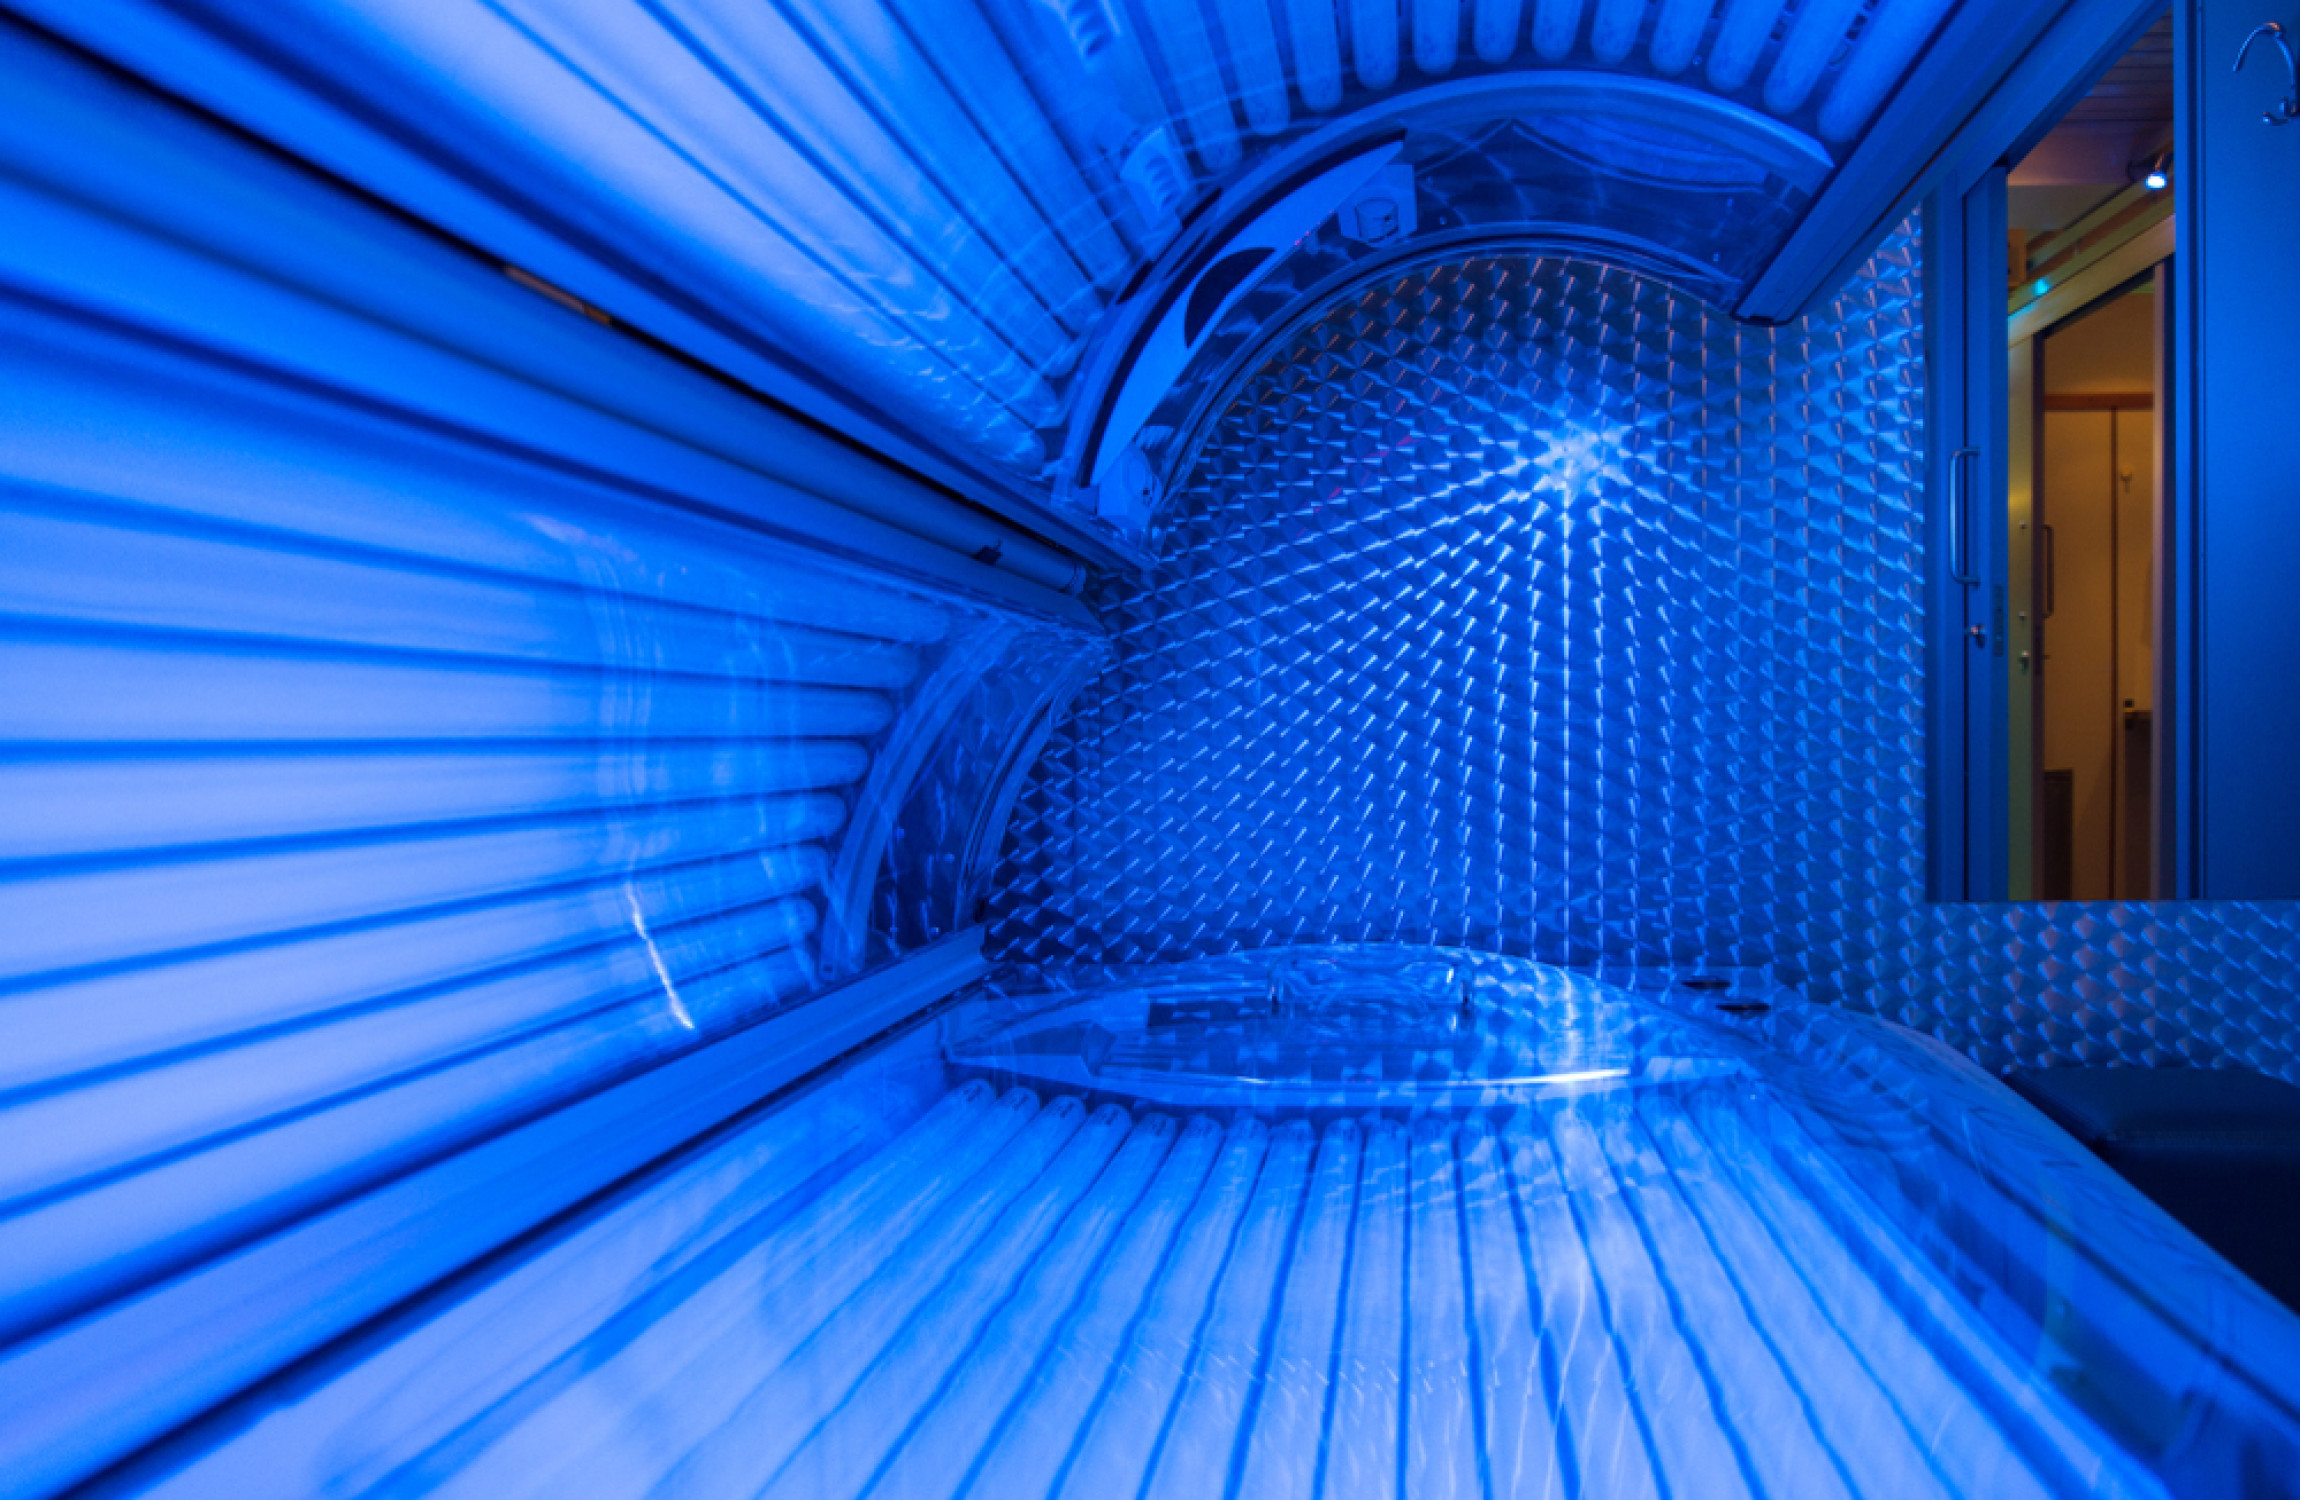 Old Style Tanning Bed Wiring Diagram